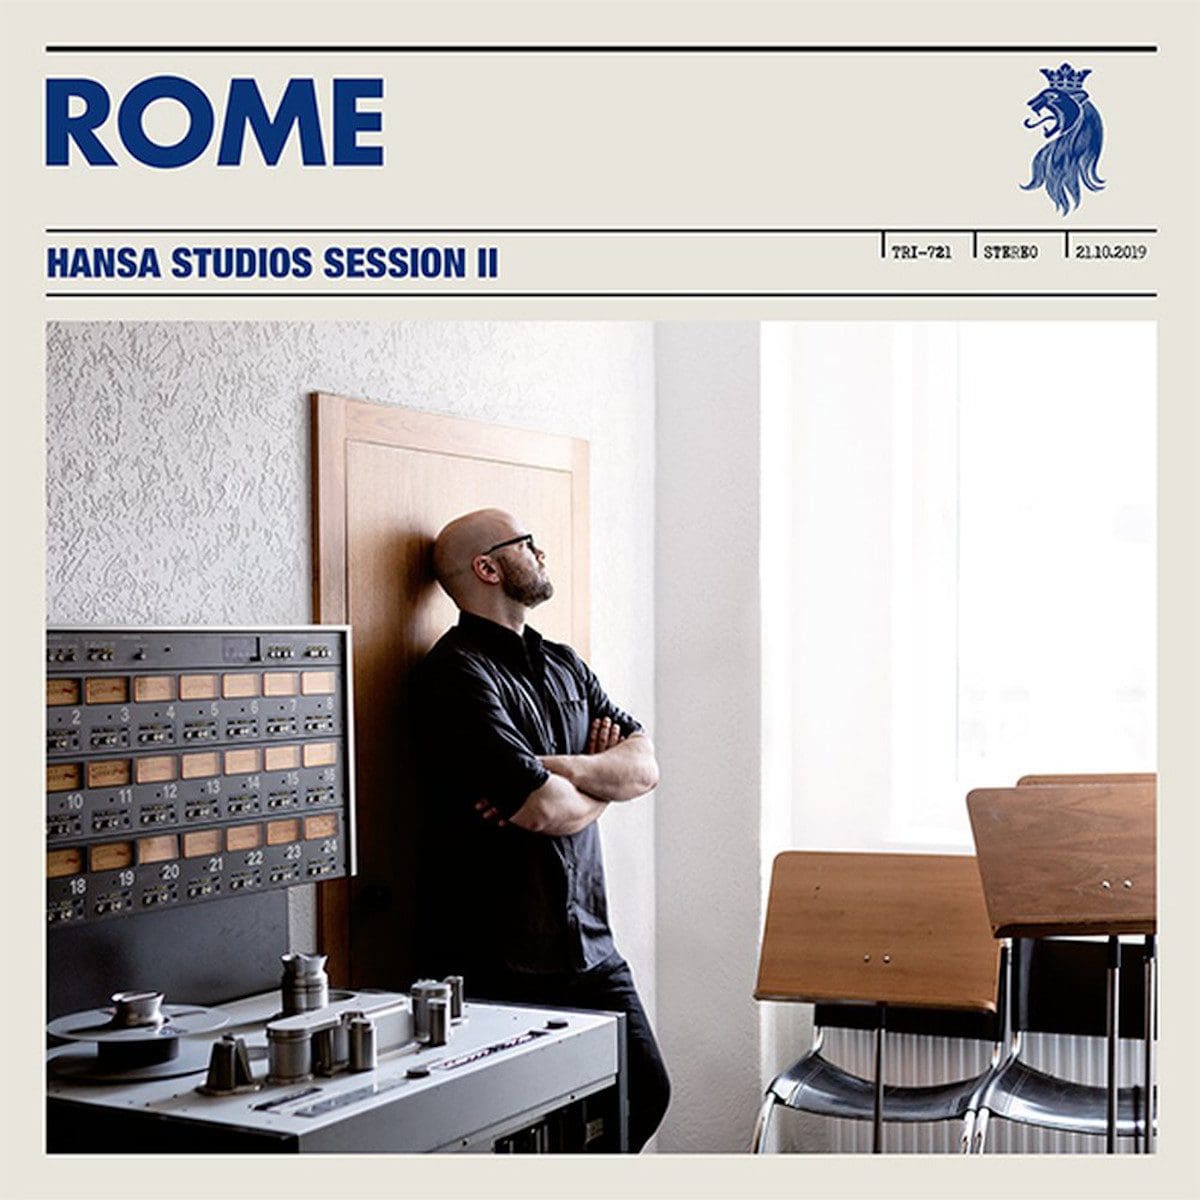 Rome to release second installment 'Hansa Studios Session' at the end of April